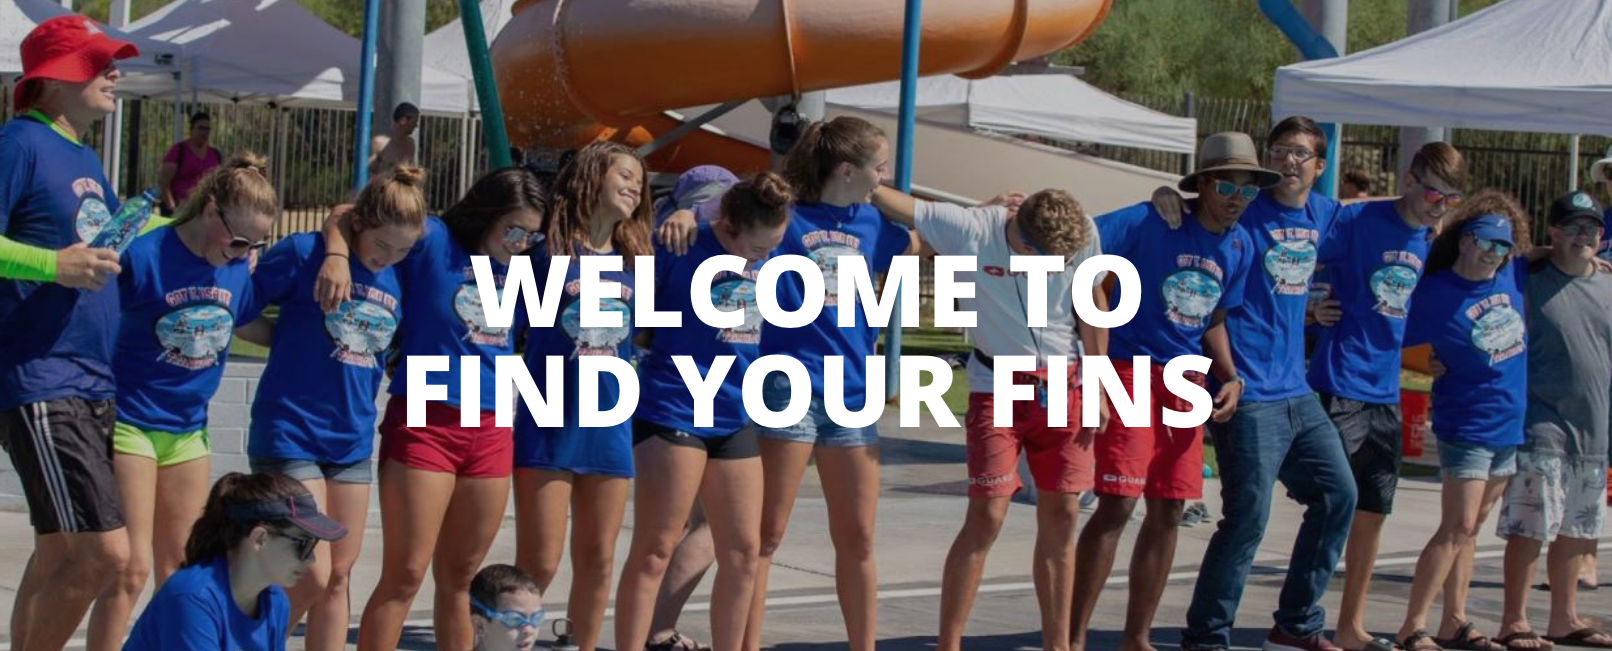 welcome to find your fins image